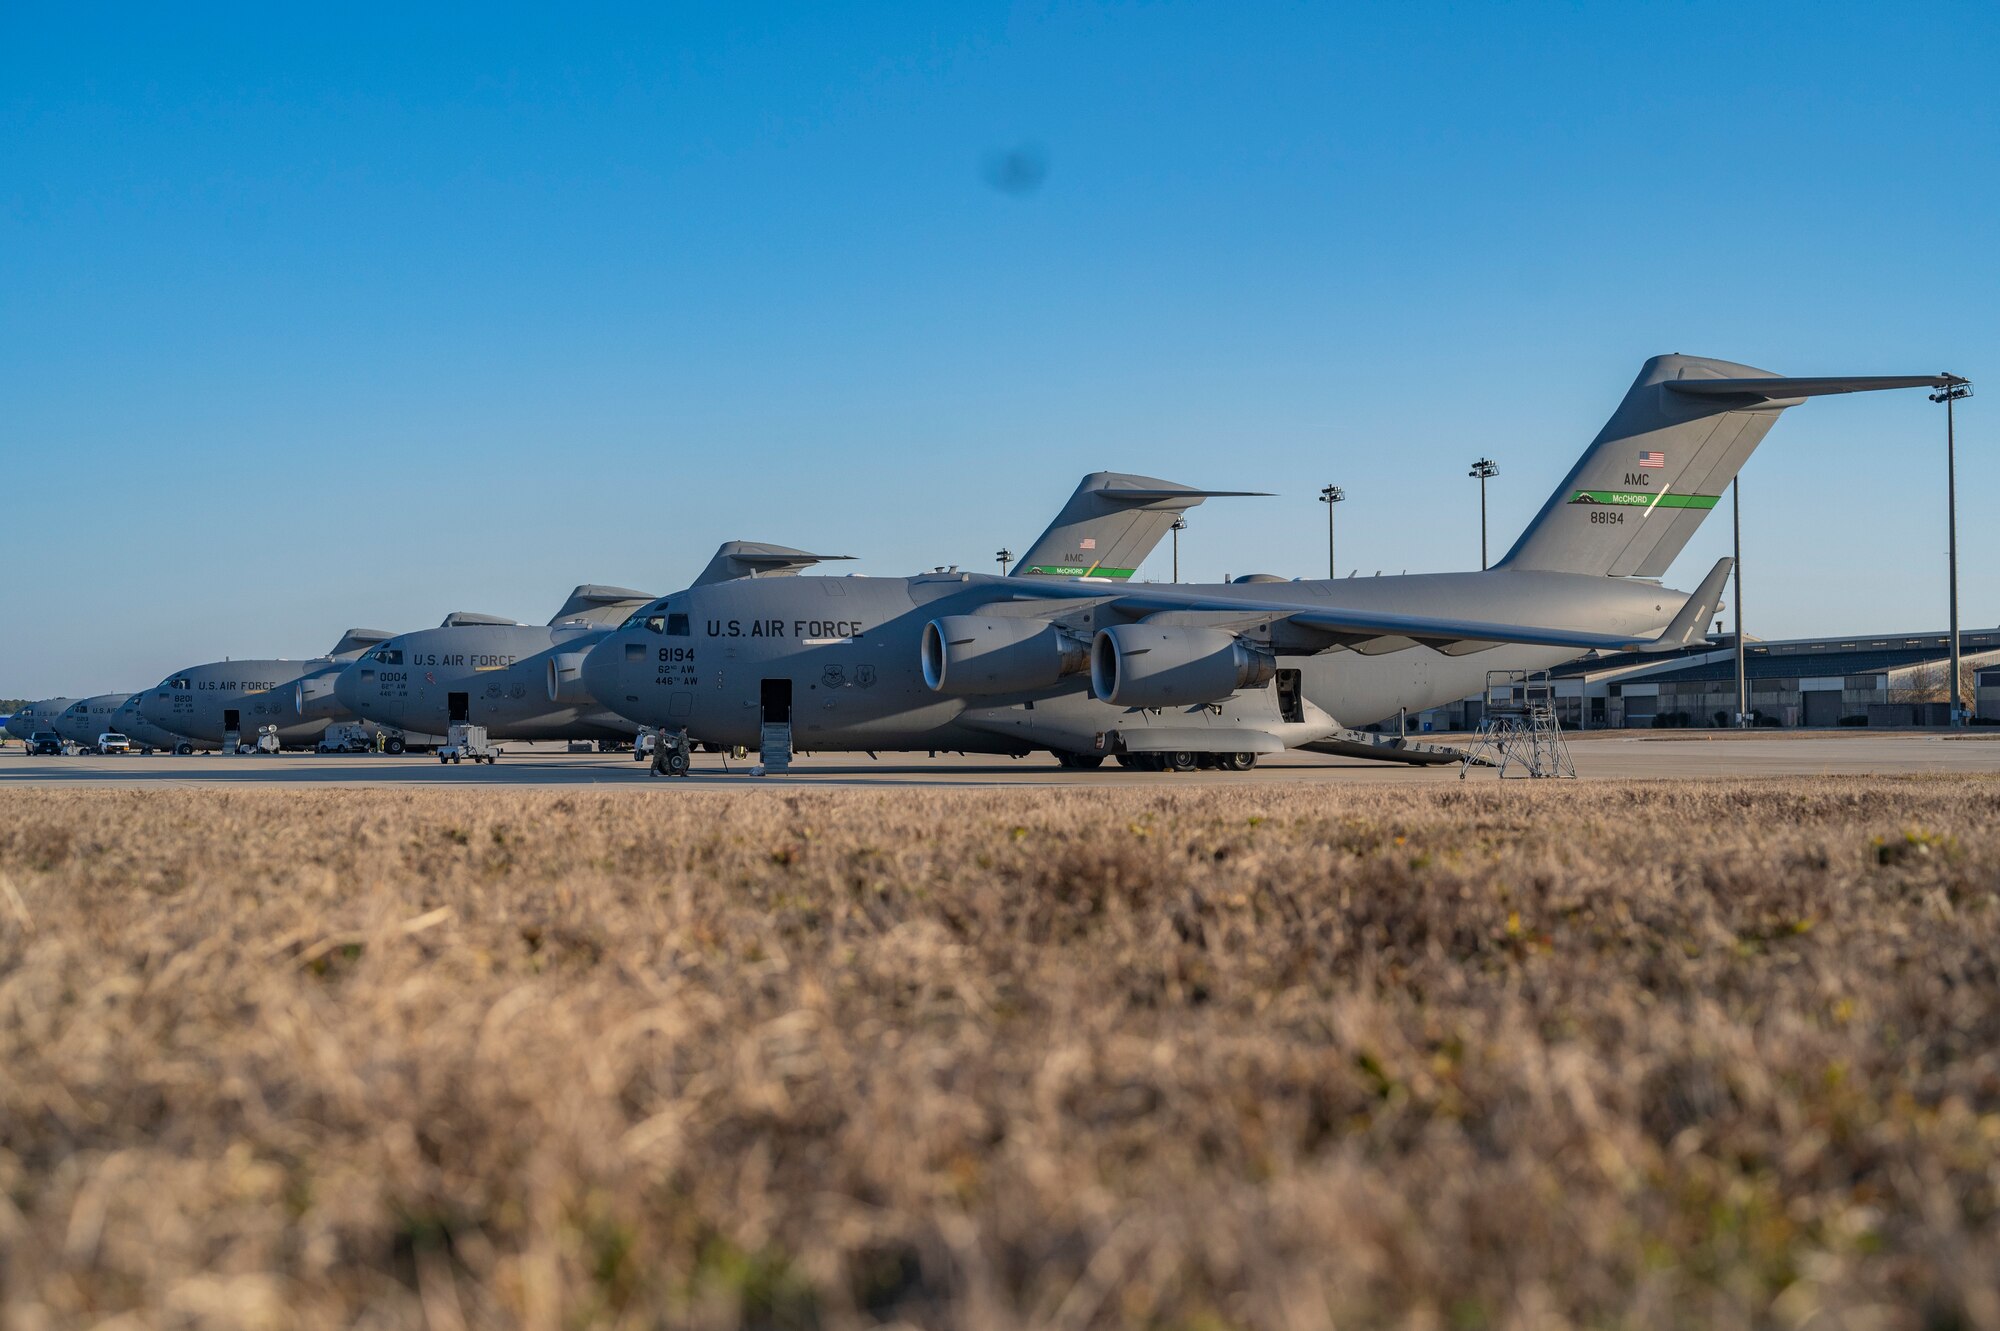 A Fleet of C-17 Globemaster IIIs assigned to Joint Base Lewis-McChord, Washington, and Joint Base Charleston, South Carolina, prepare to takeoff during Battalion Mass Tactical Week, or BMTW, at Pope Army Airfield, North Carolina, Feb. 1, 2022. BMTW is a joint exercise between the U.S. Air Force and the U.S. Army, which gives participants the ability to practice contingency operations in a controlled environment. (U.S. Air Force photo by Airman 1st Class Charles Casner)